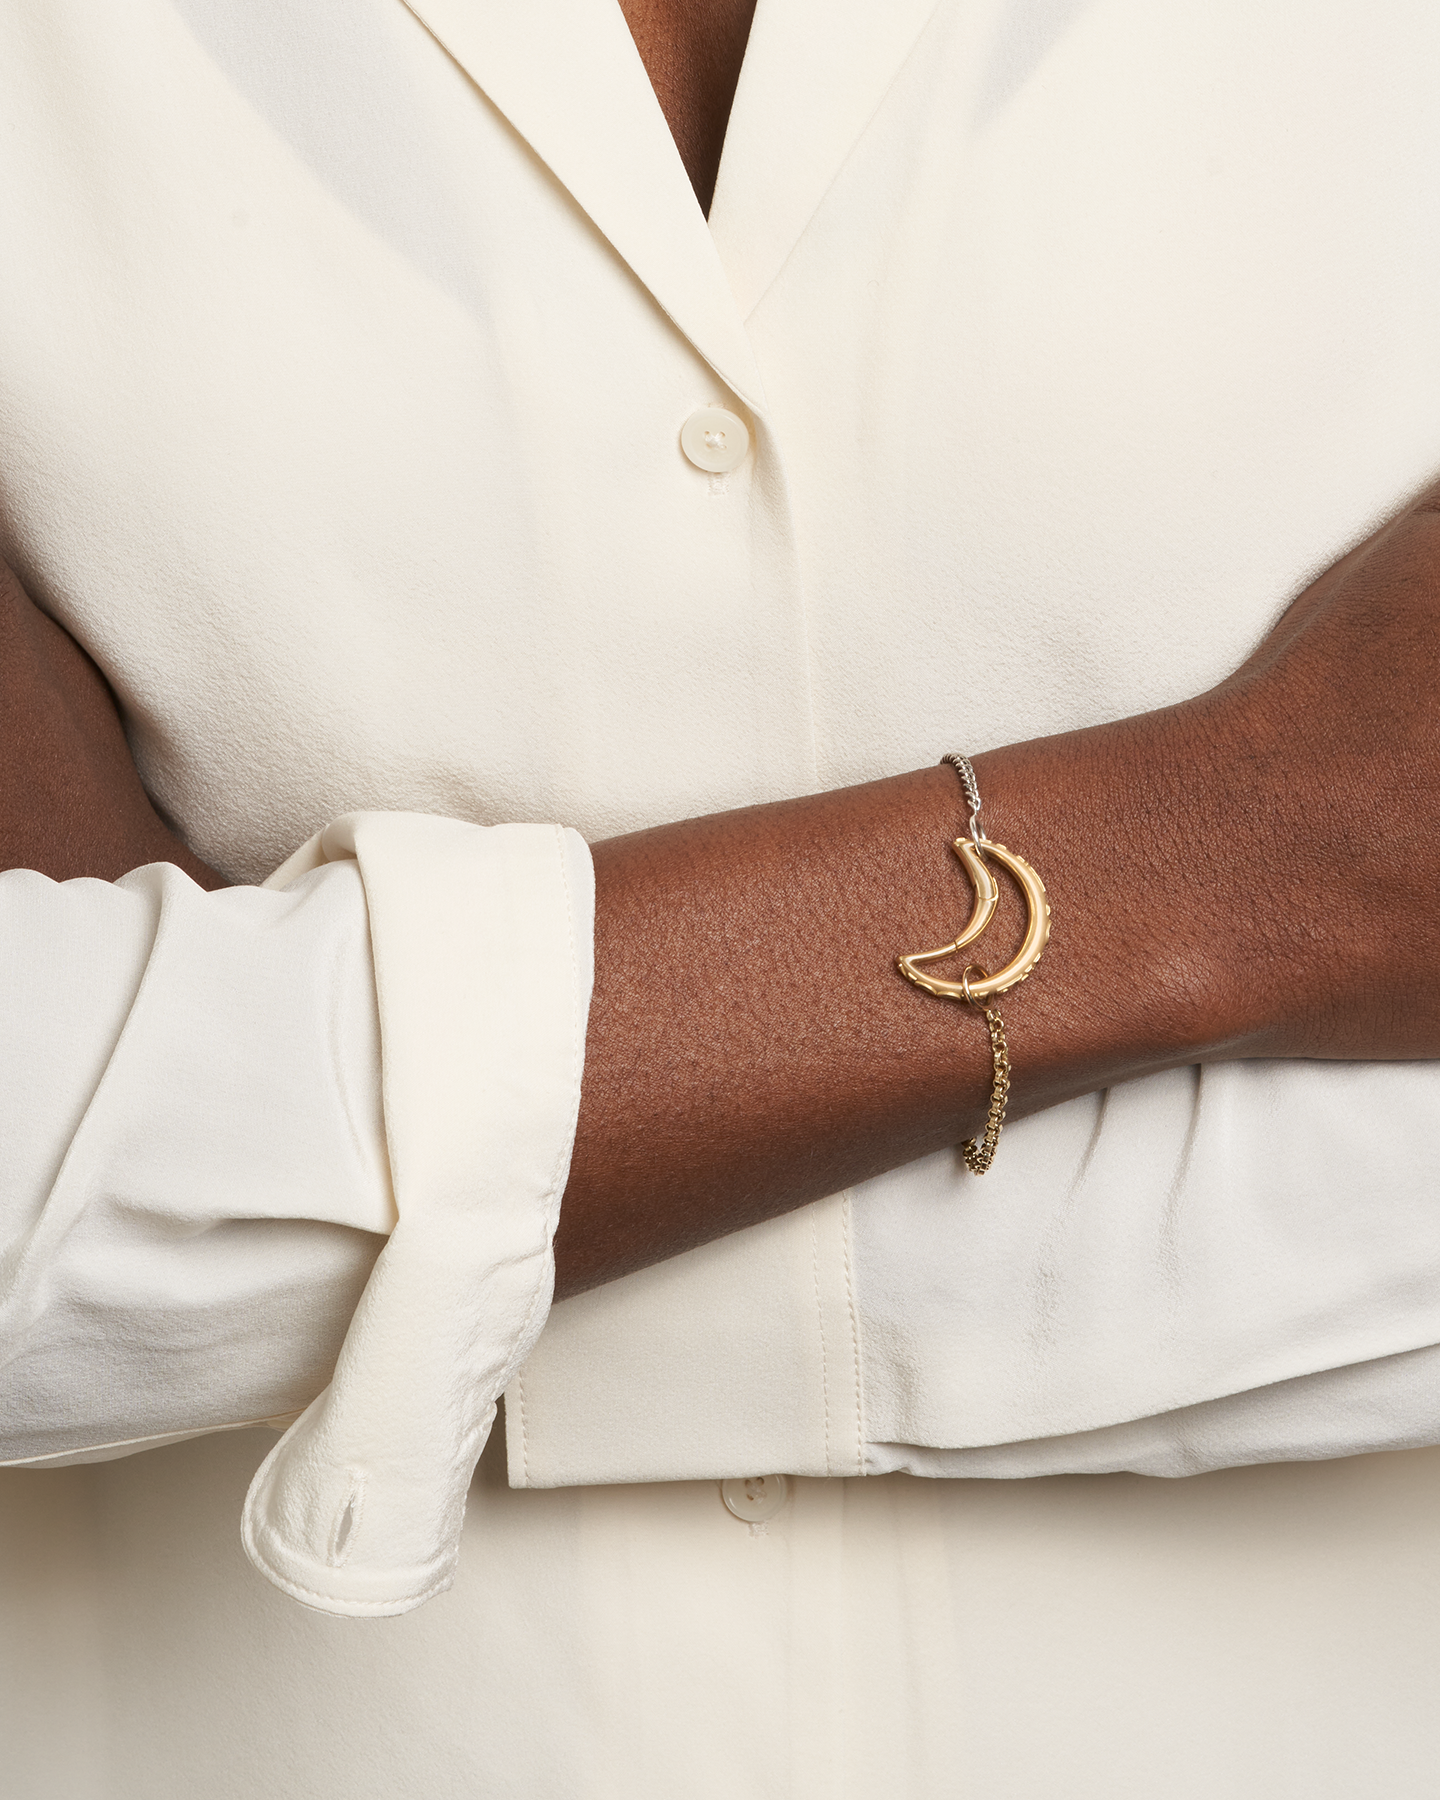 Close up of woman's wrist wearing silver and gold chain bracelet